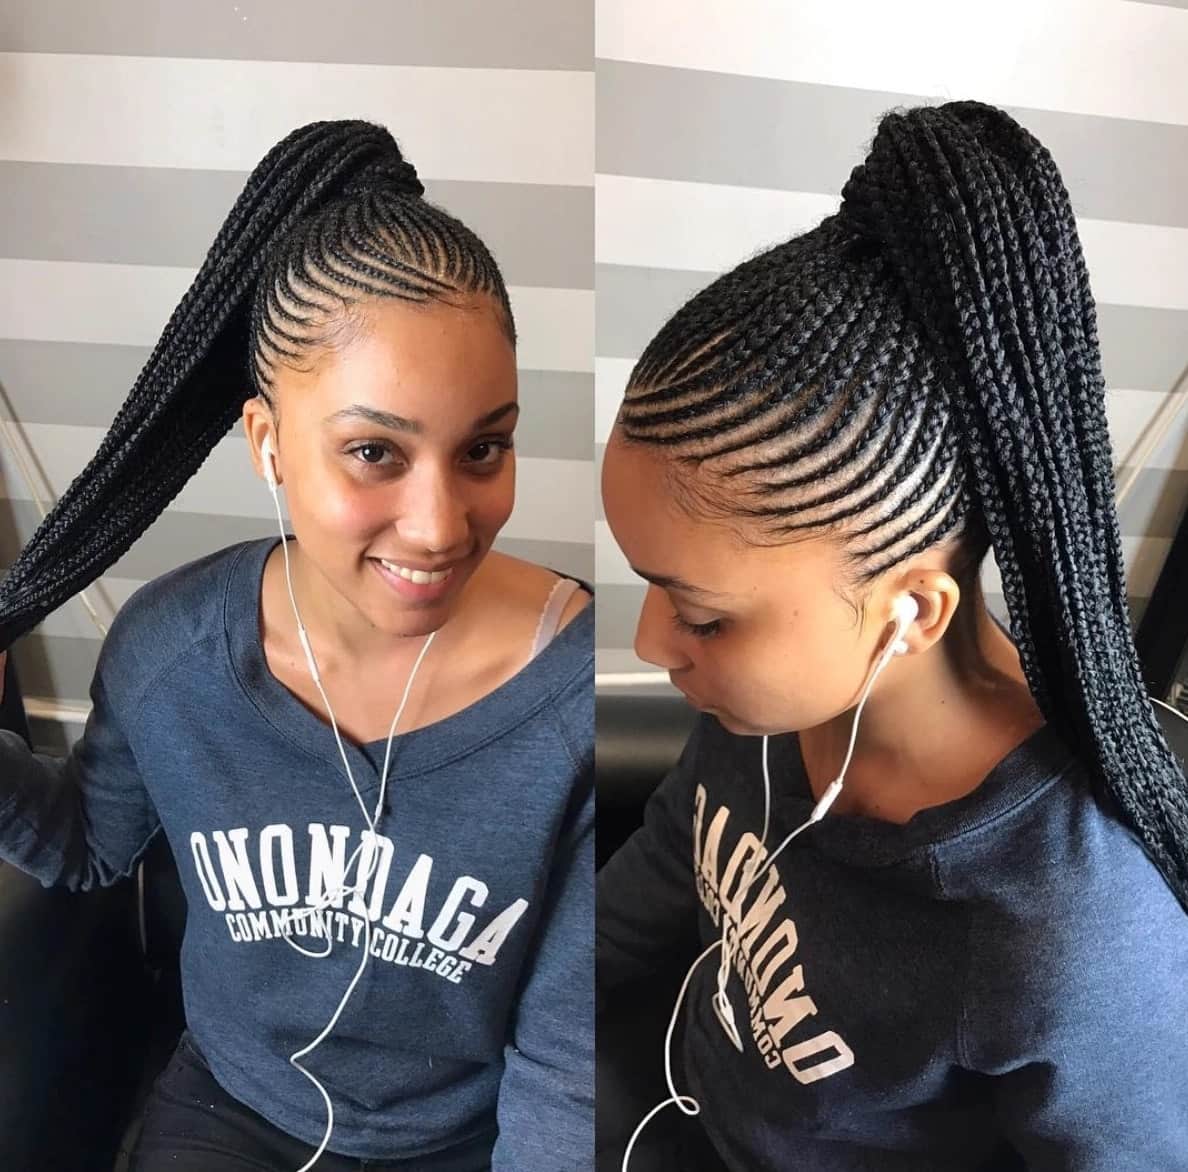 10 best braided hairstyles on Instagram you need to try next - Face2Face  Africa